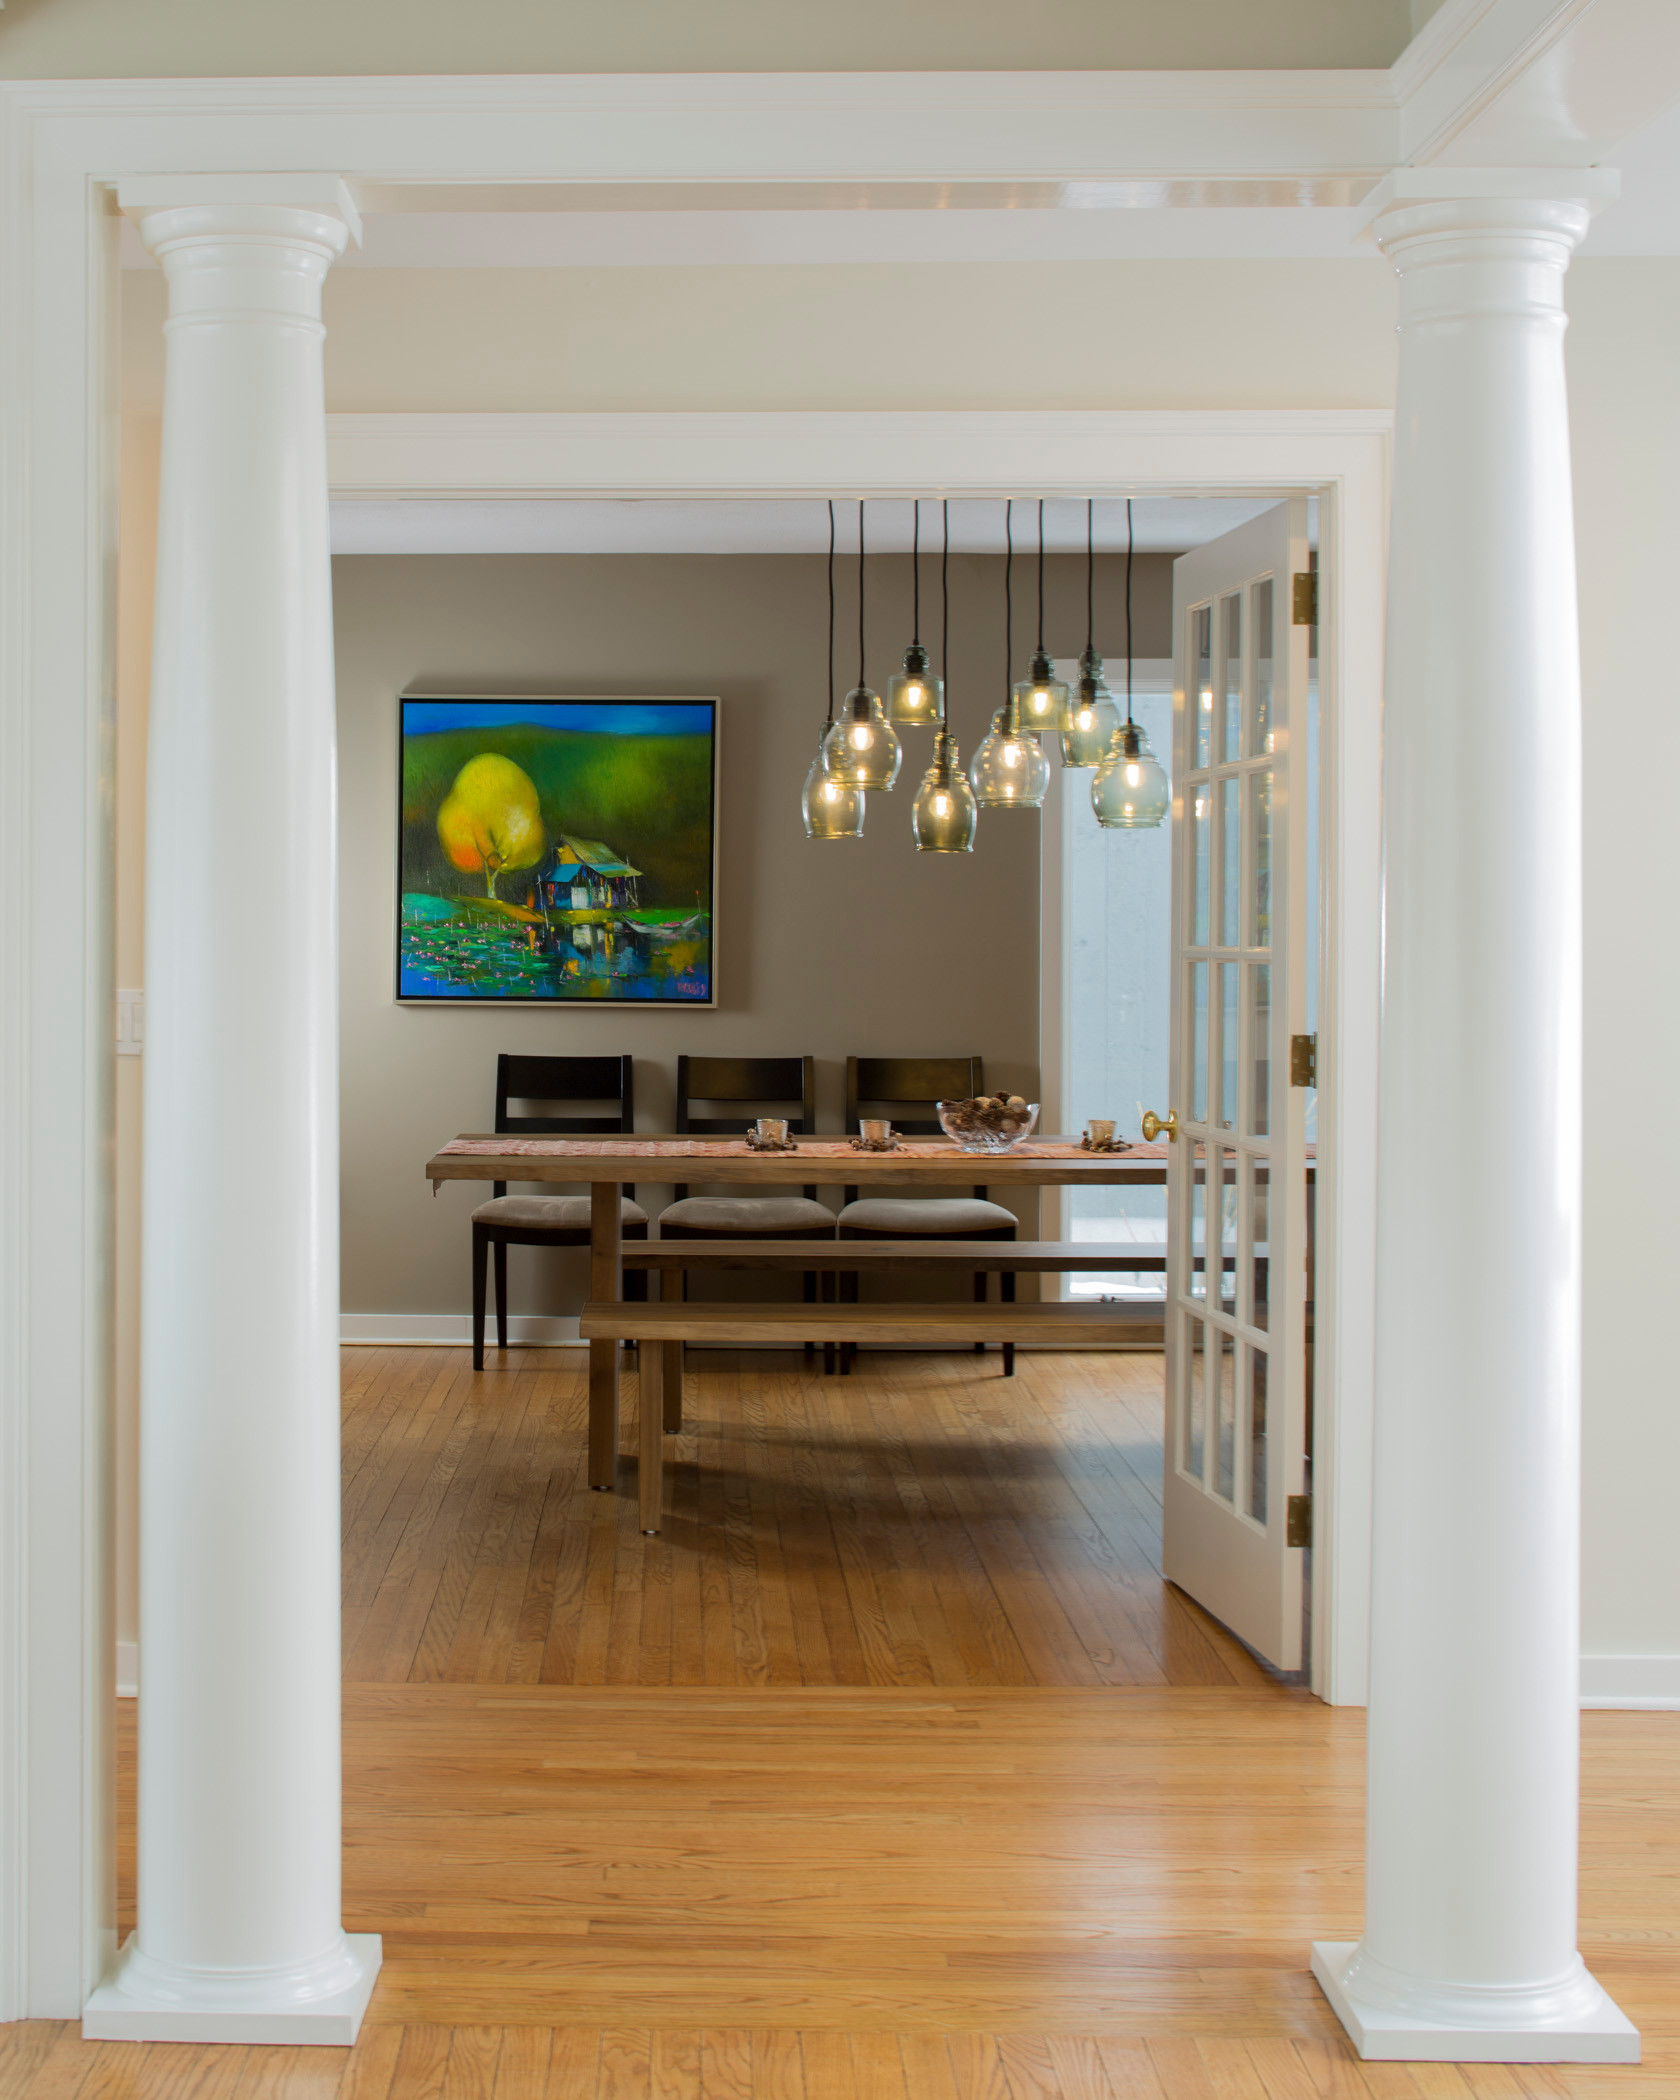 Dining and Family Room integrated with Columns